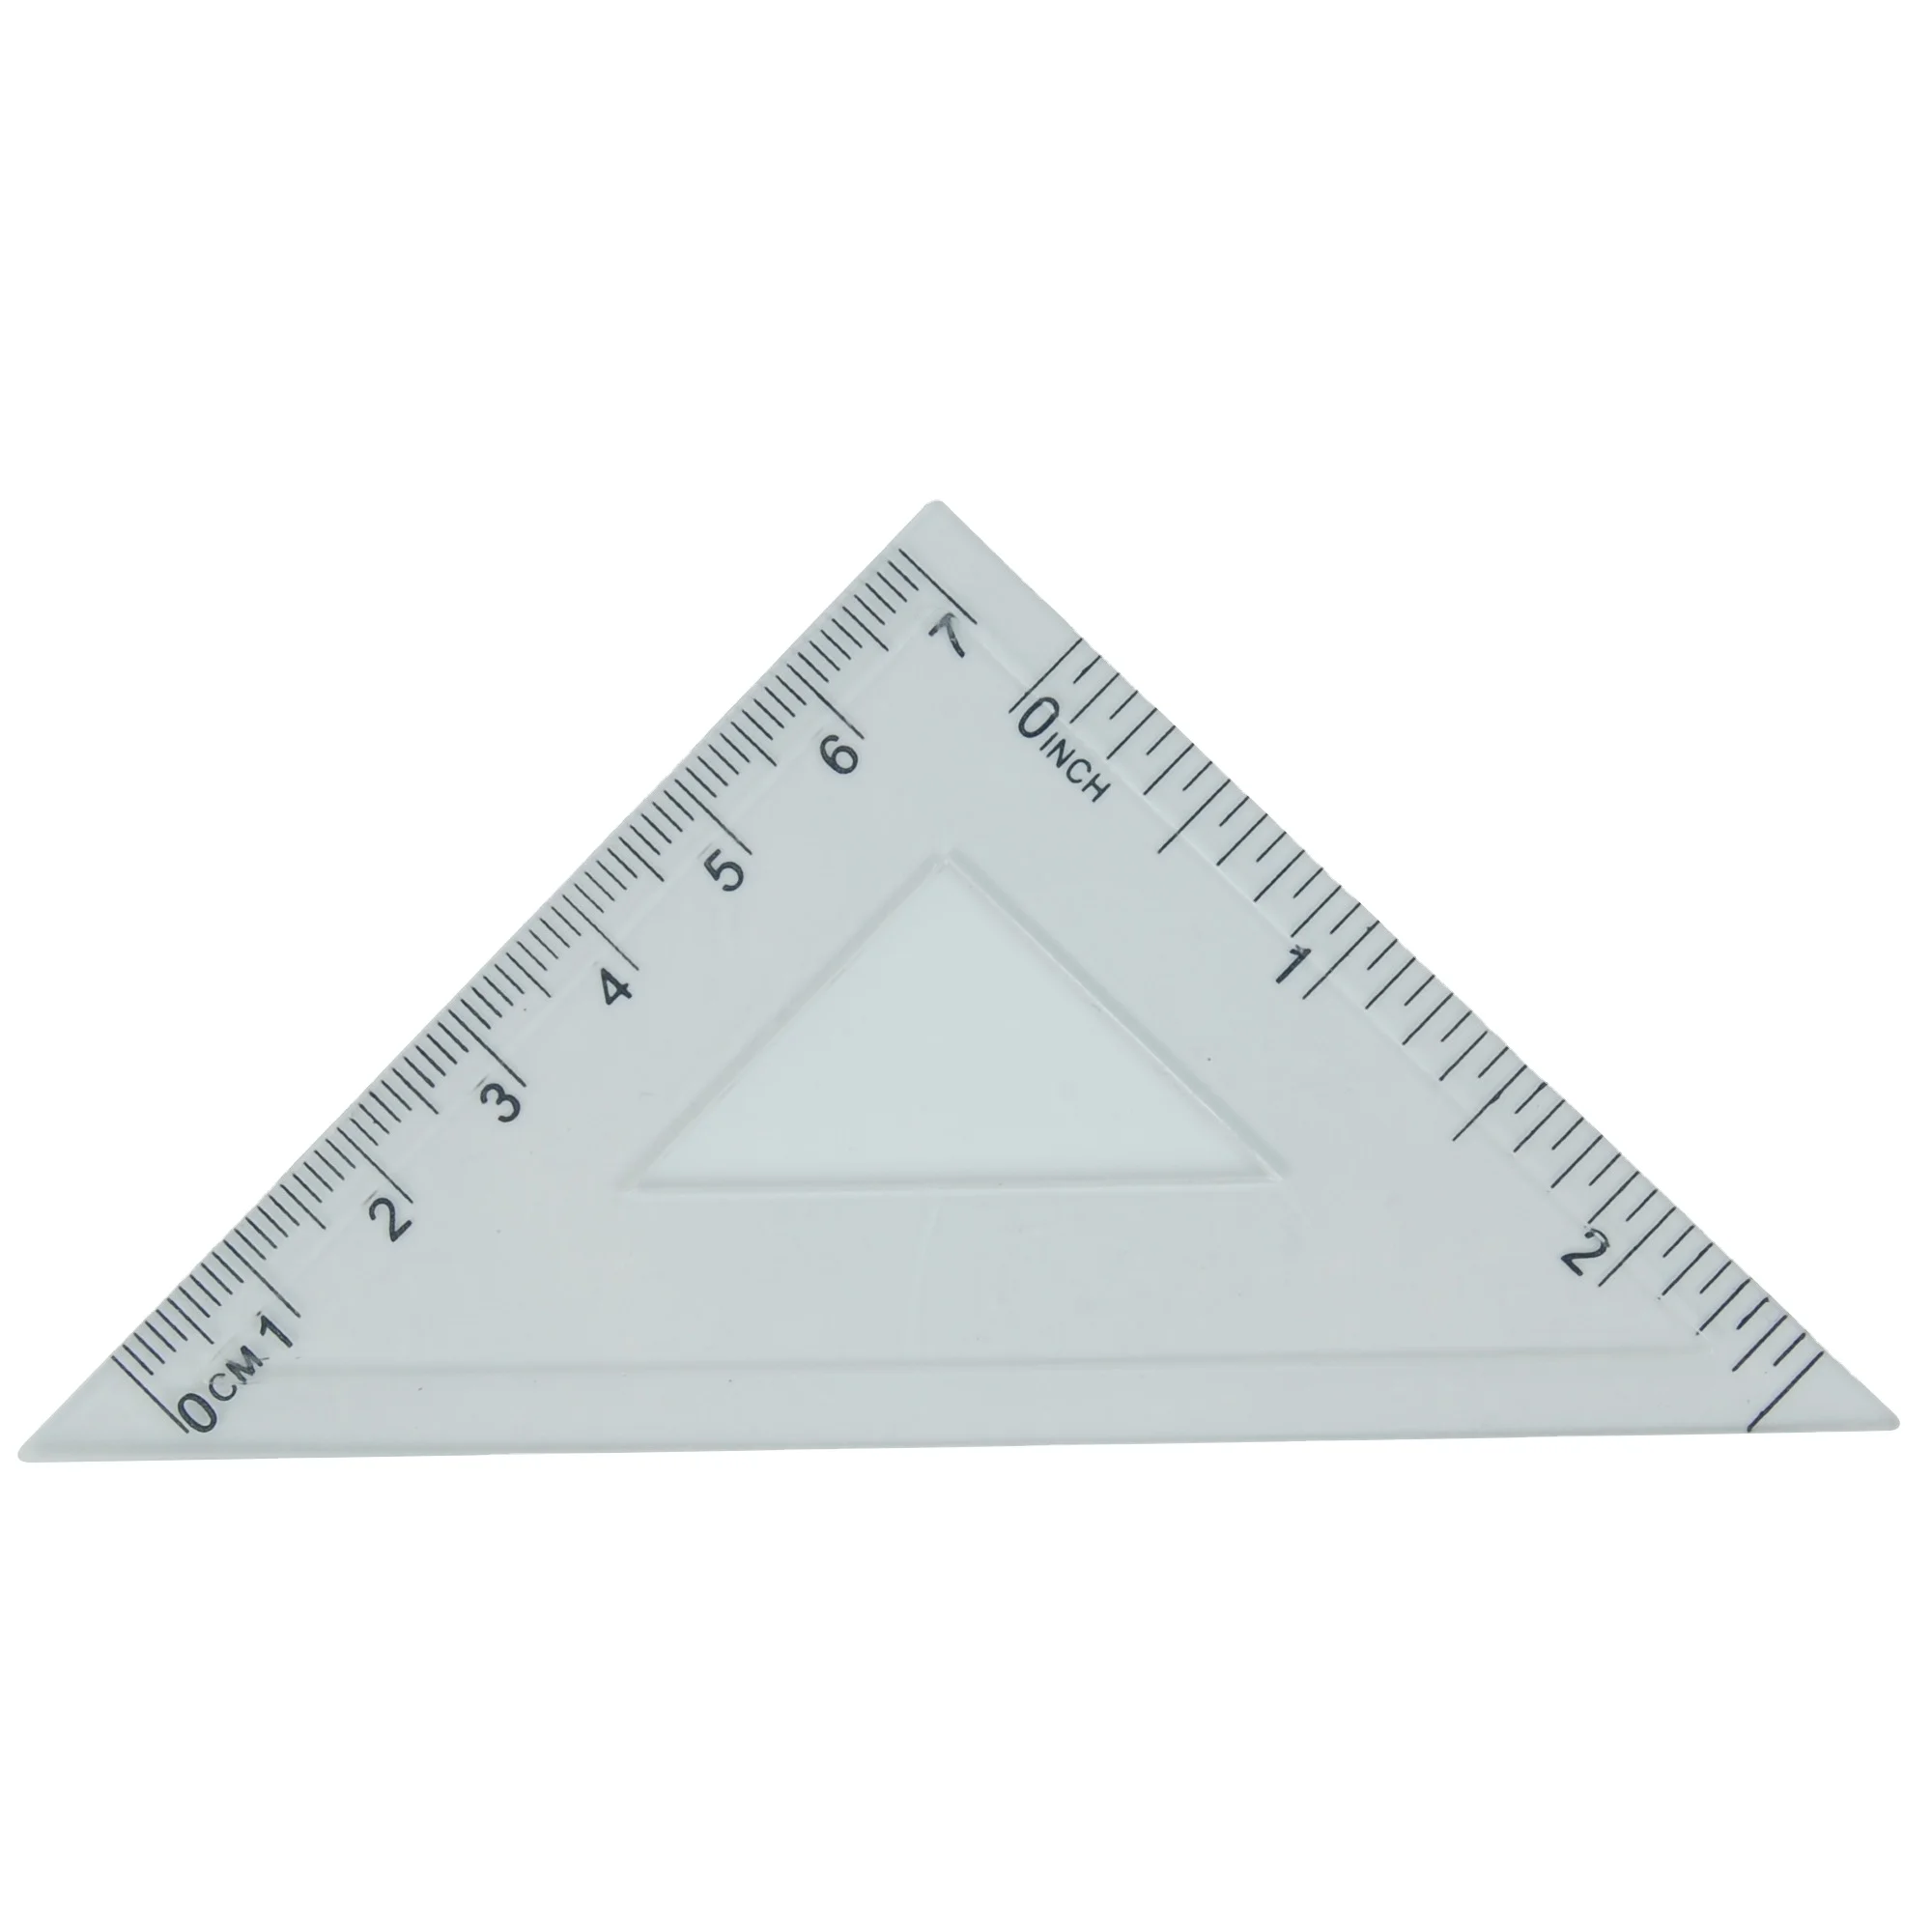 Wholesale China Trade Most Popular Xiangke M8706 Plastic Ruler